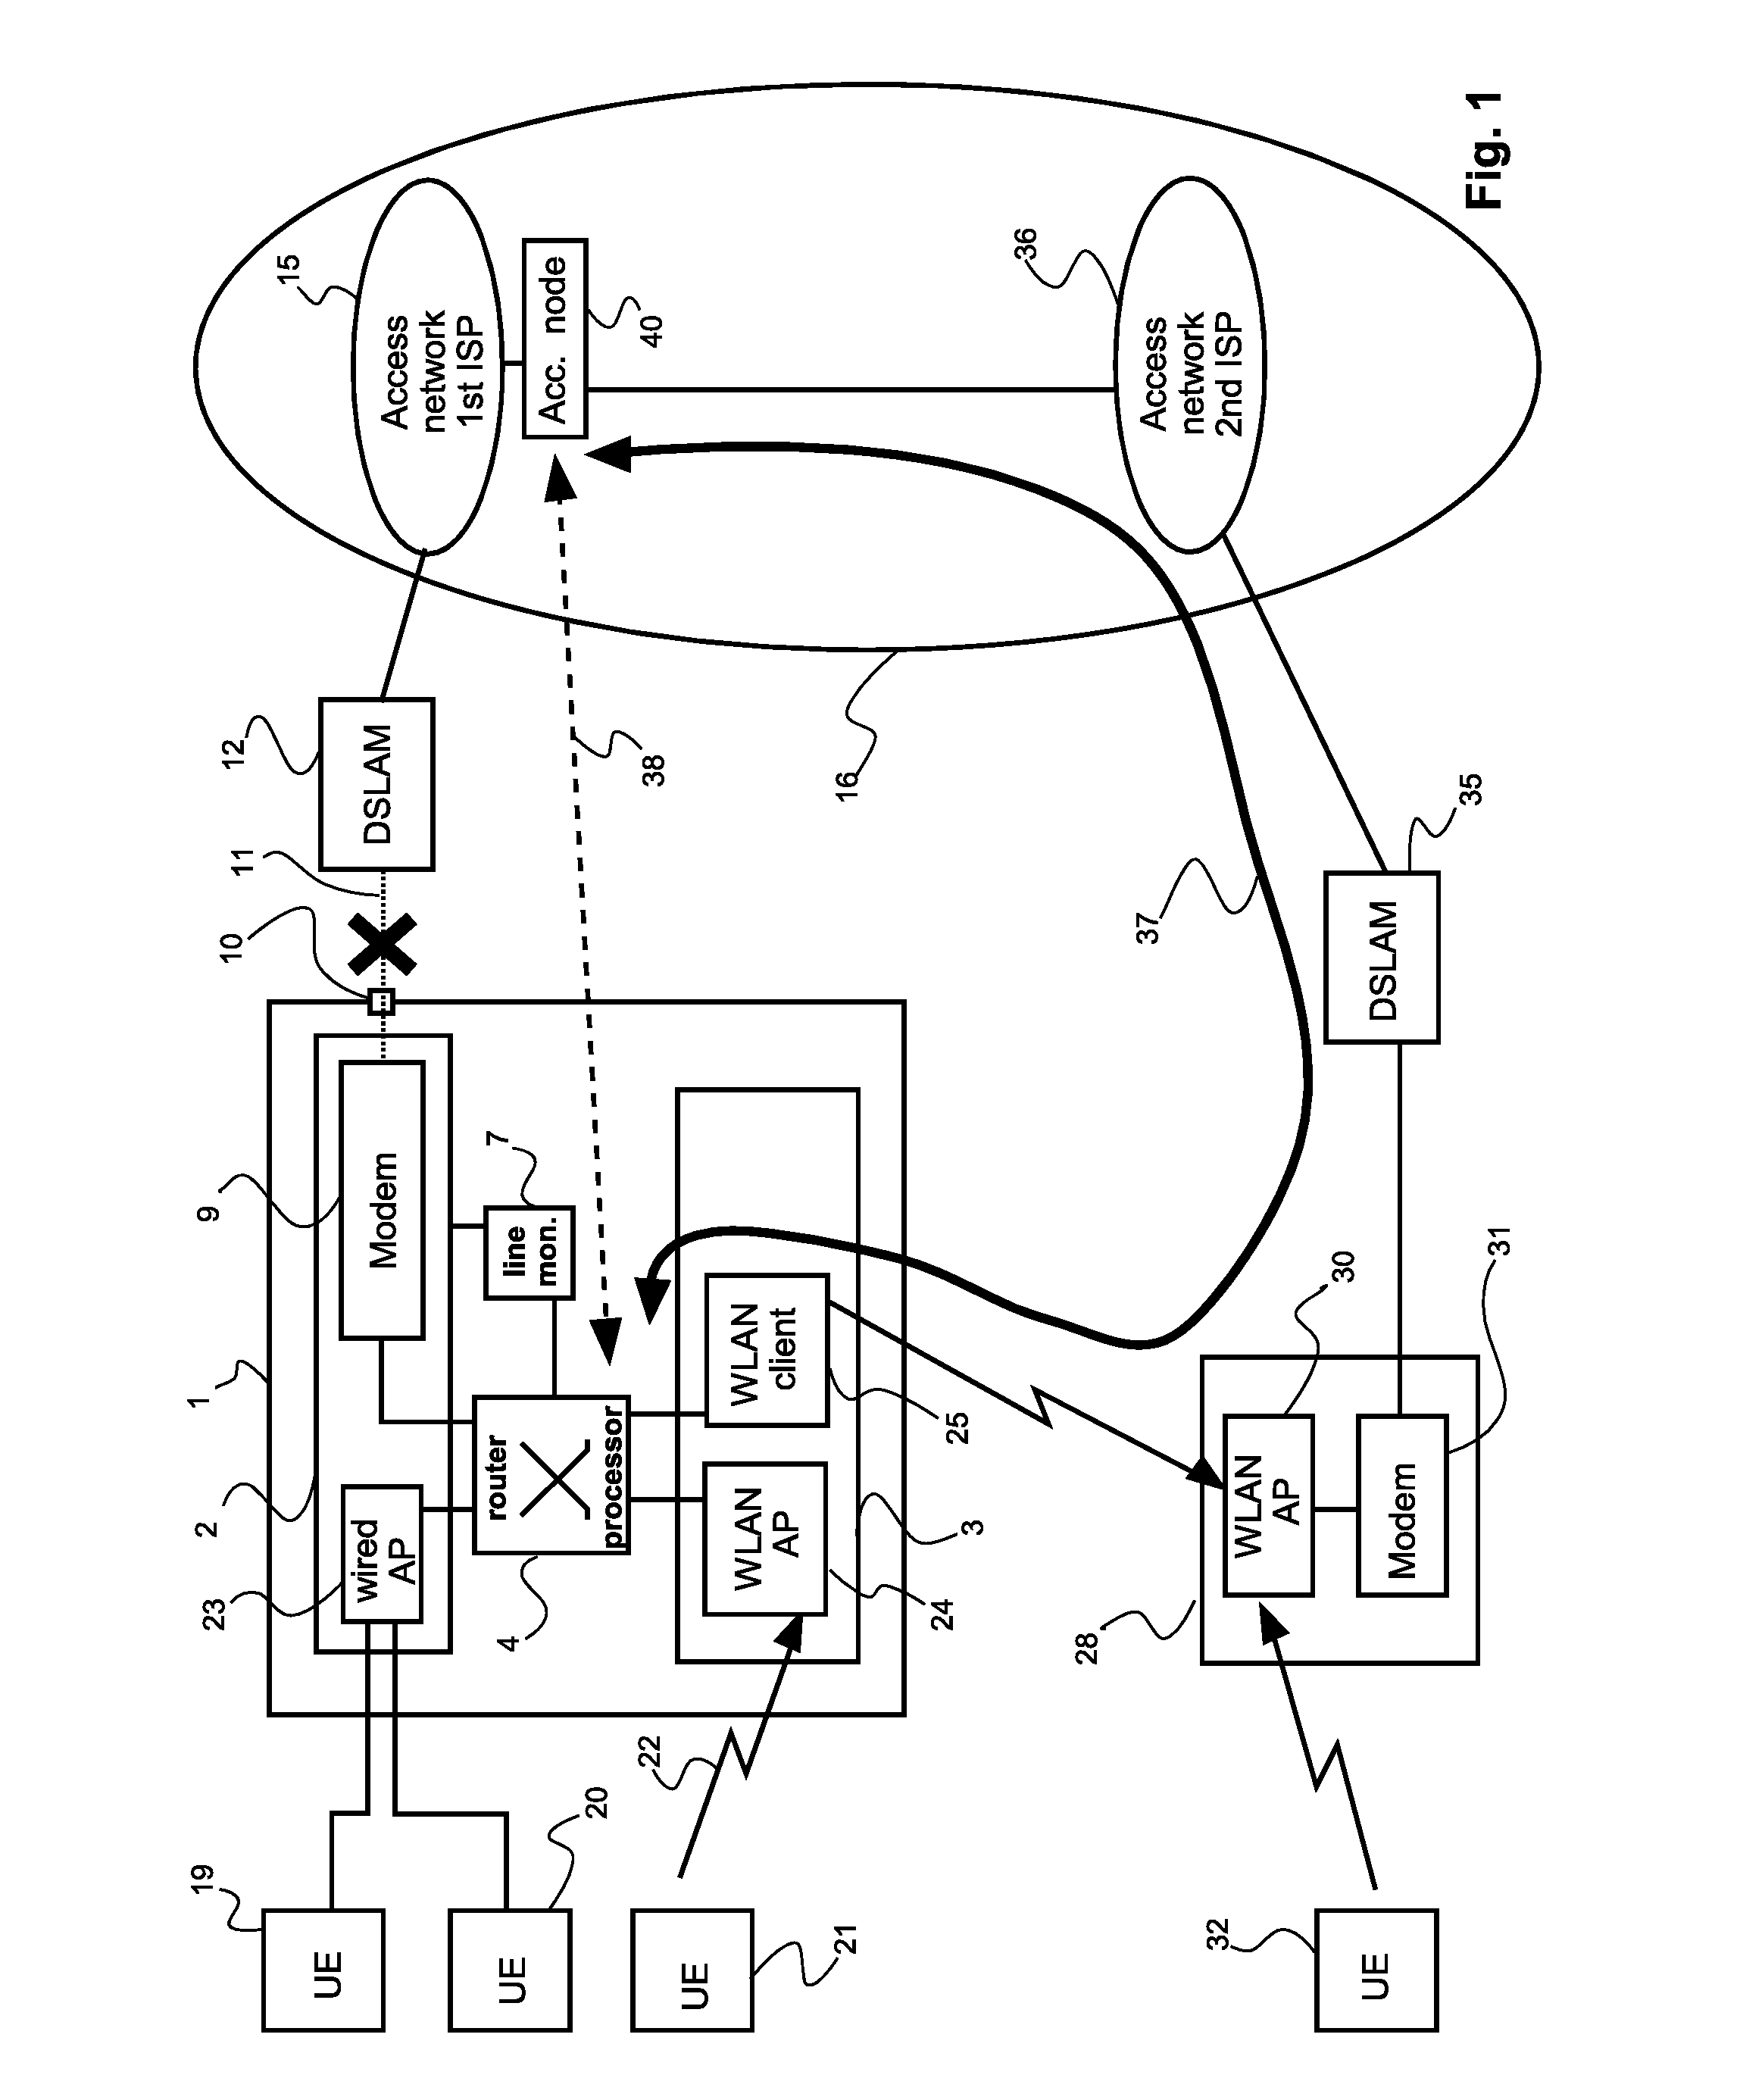 Modem-Router Unit, Access Node, and Method of Enabling Communication with a Packet Switched Network